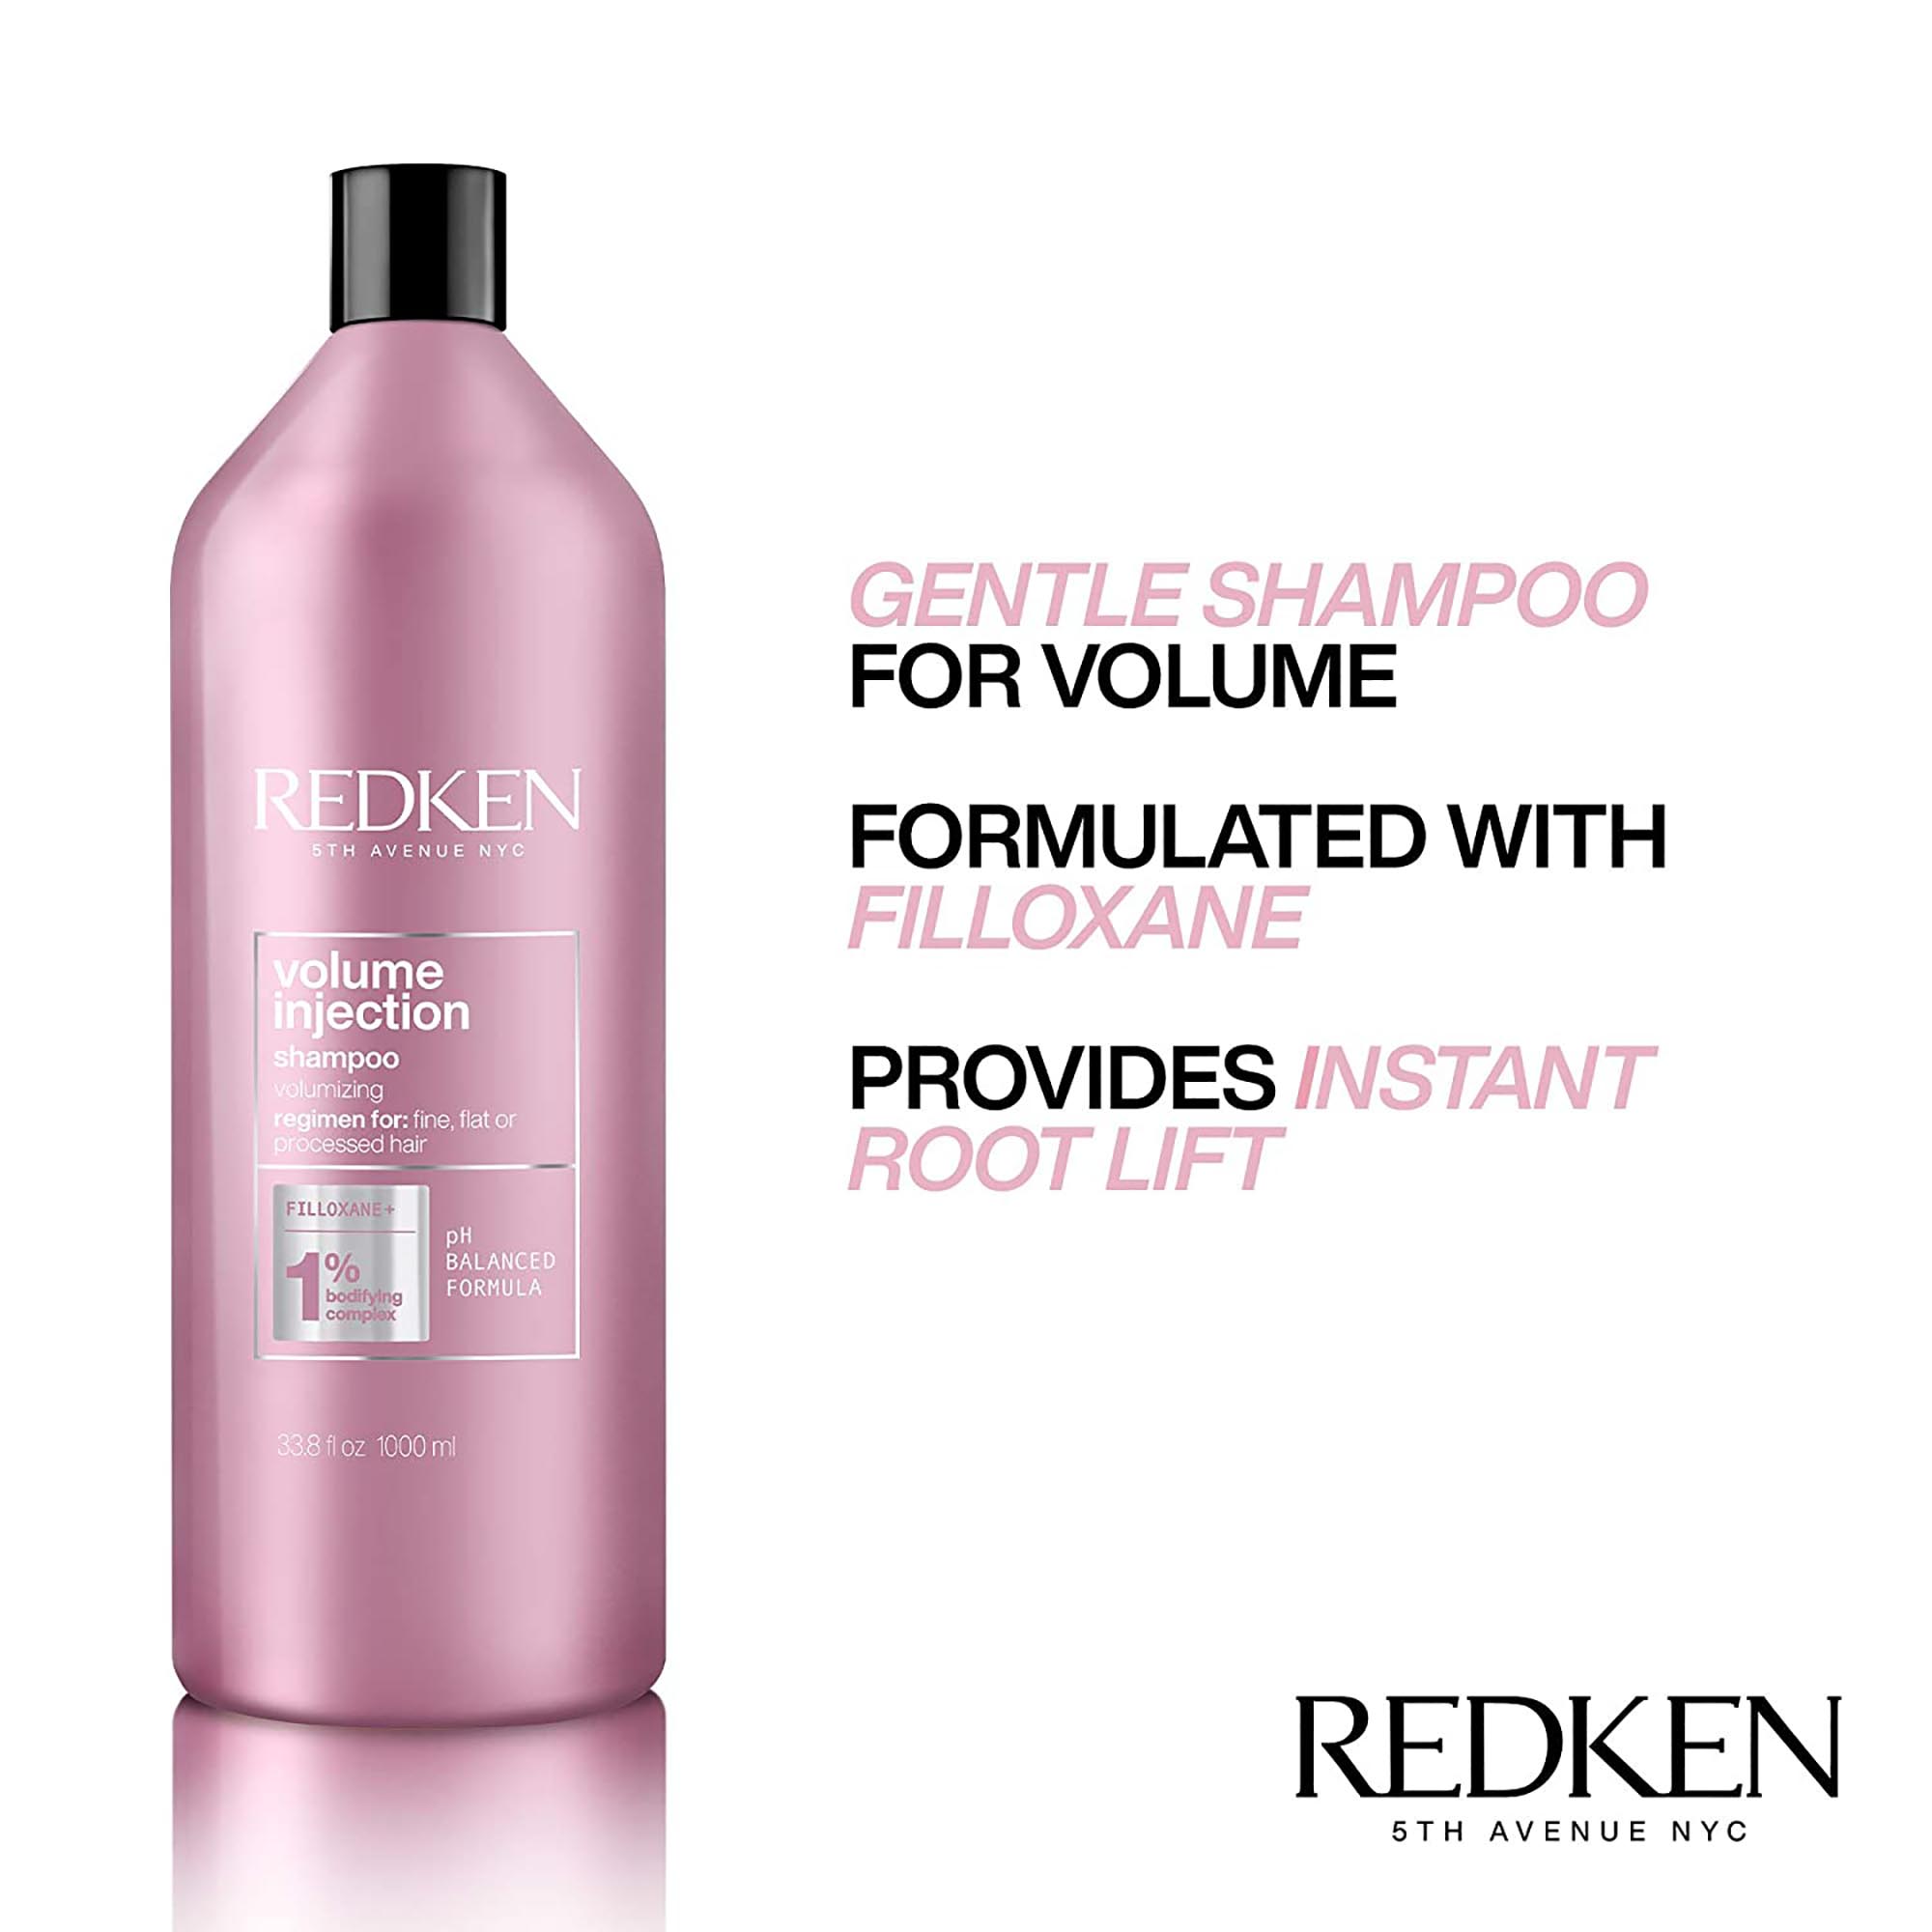 Redken Volume Injection Shampoo and Conditioner Liter Duo ($104 Value) / LITER